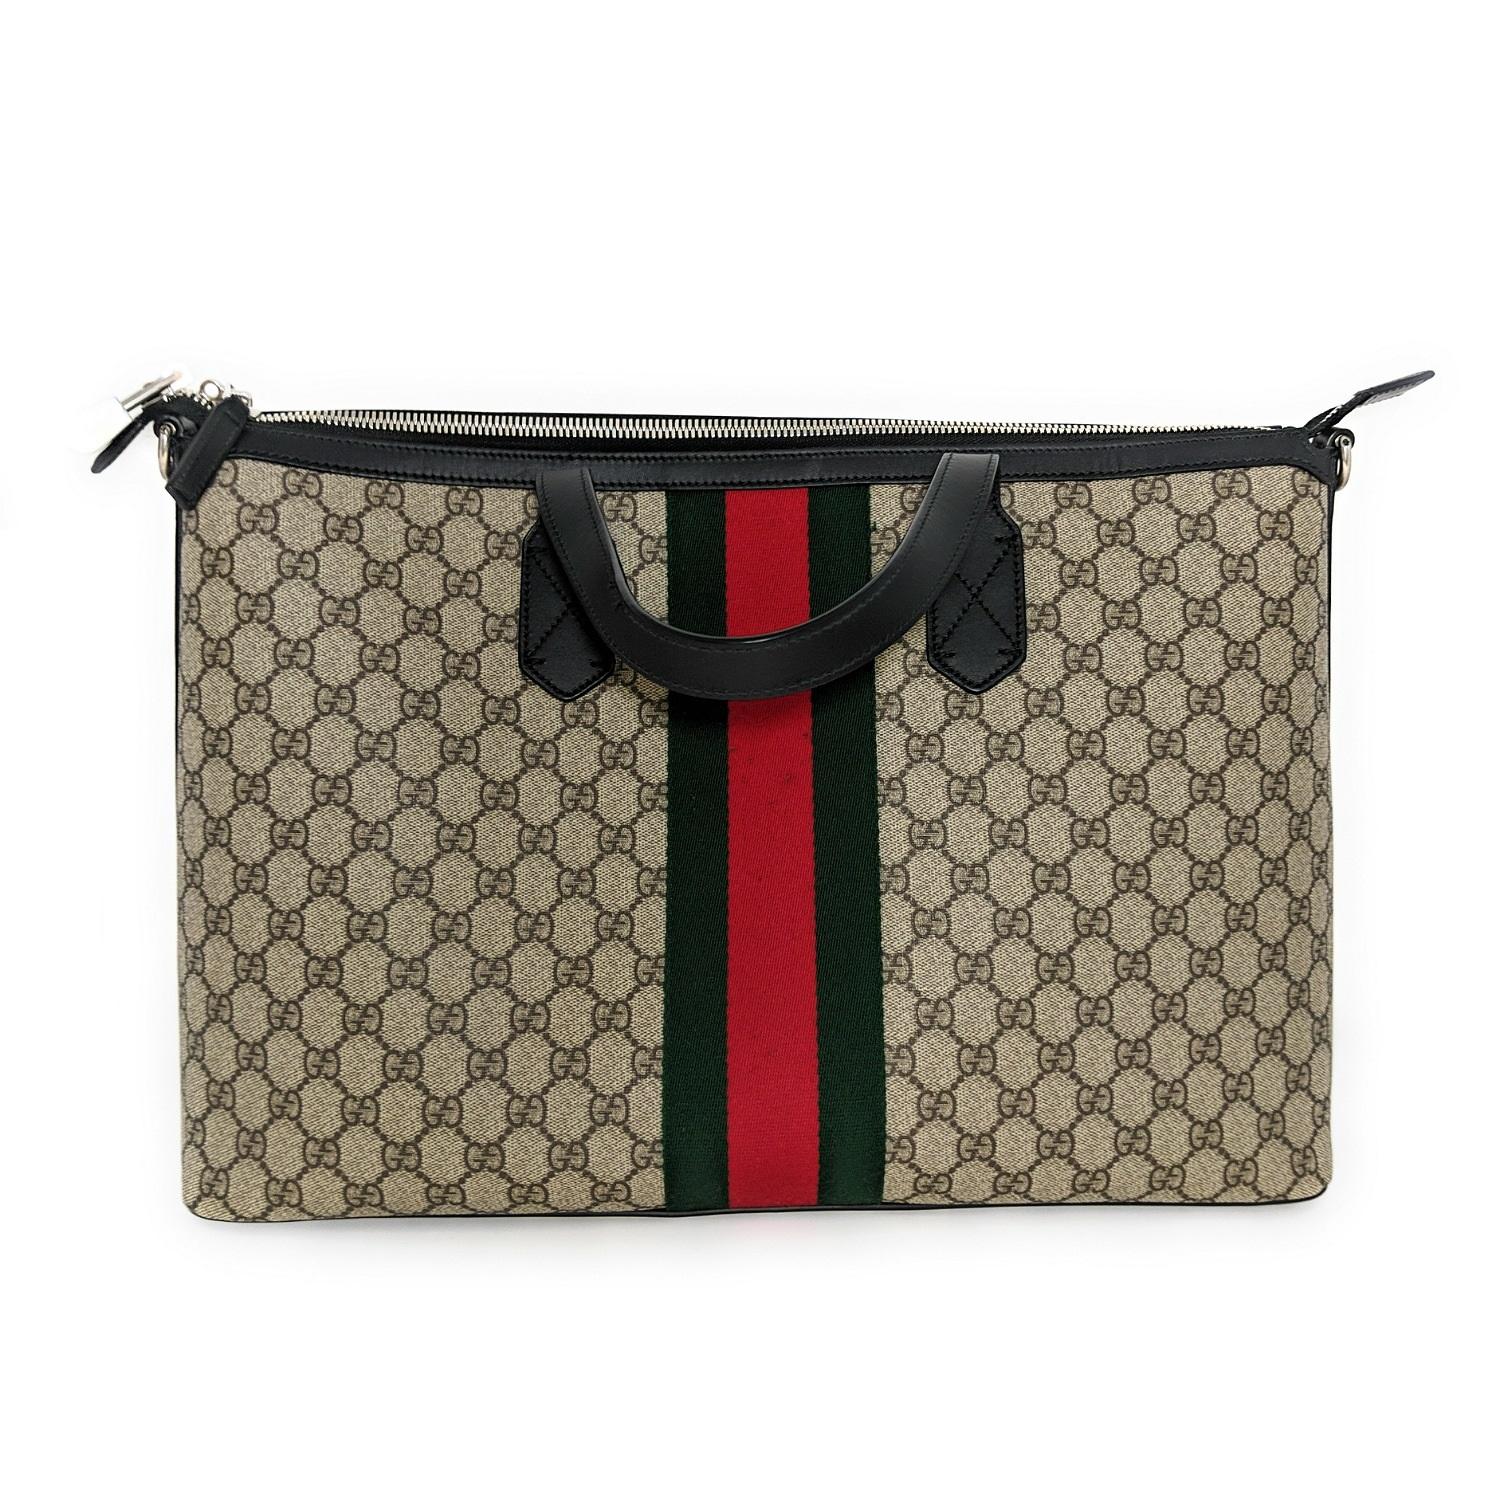 This large stylish tote is crafted of Gucci GG monogram canvas detailed with a black complimentary trim along the top crest and corner reinforcements. The bag features a wide 3 inch web stripe along the mid-center body of the bag with black rolled